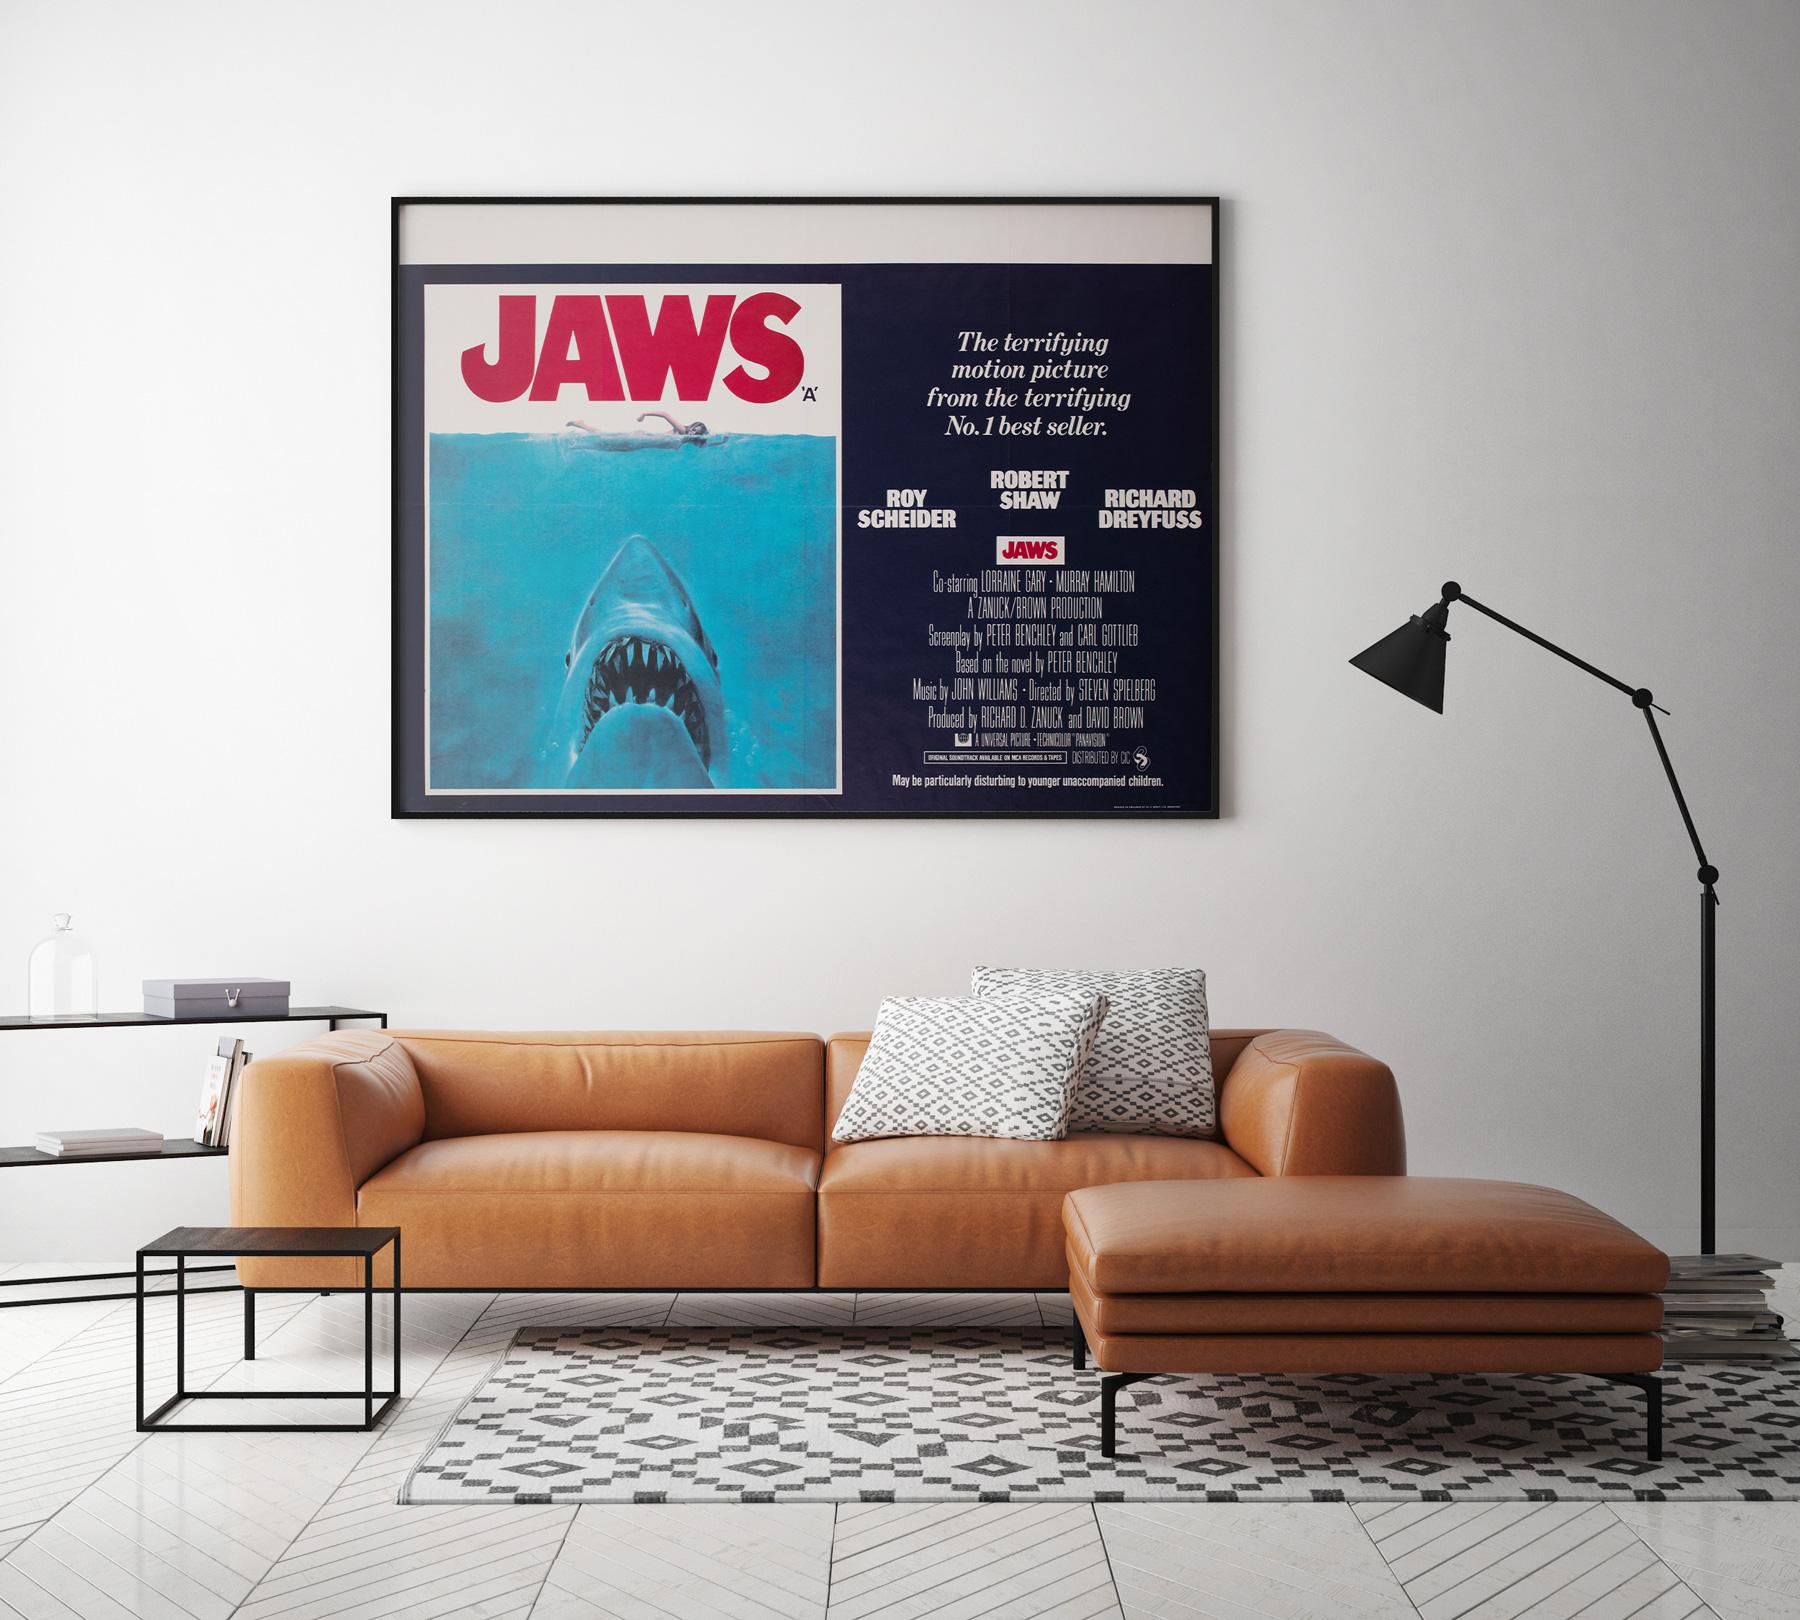 The poster with plenty of bite.

The UK Quad for Steven Spielberg’s seminal 70s Shark chiller Jaws, featuring the classic Roger Kastel artwork. In excellent unrestored condition. 

This vintage movie poster is sized 30 x 40 inches. Will be sent